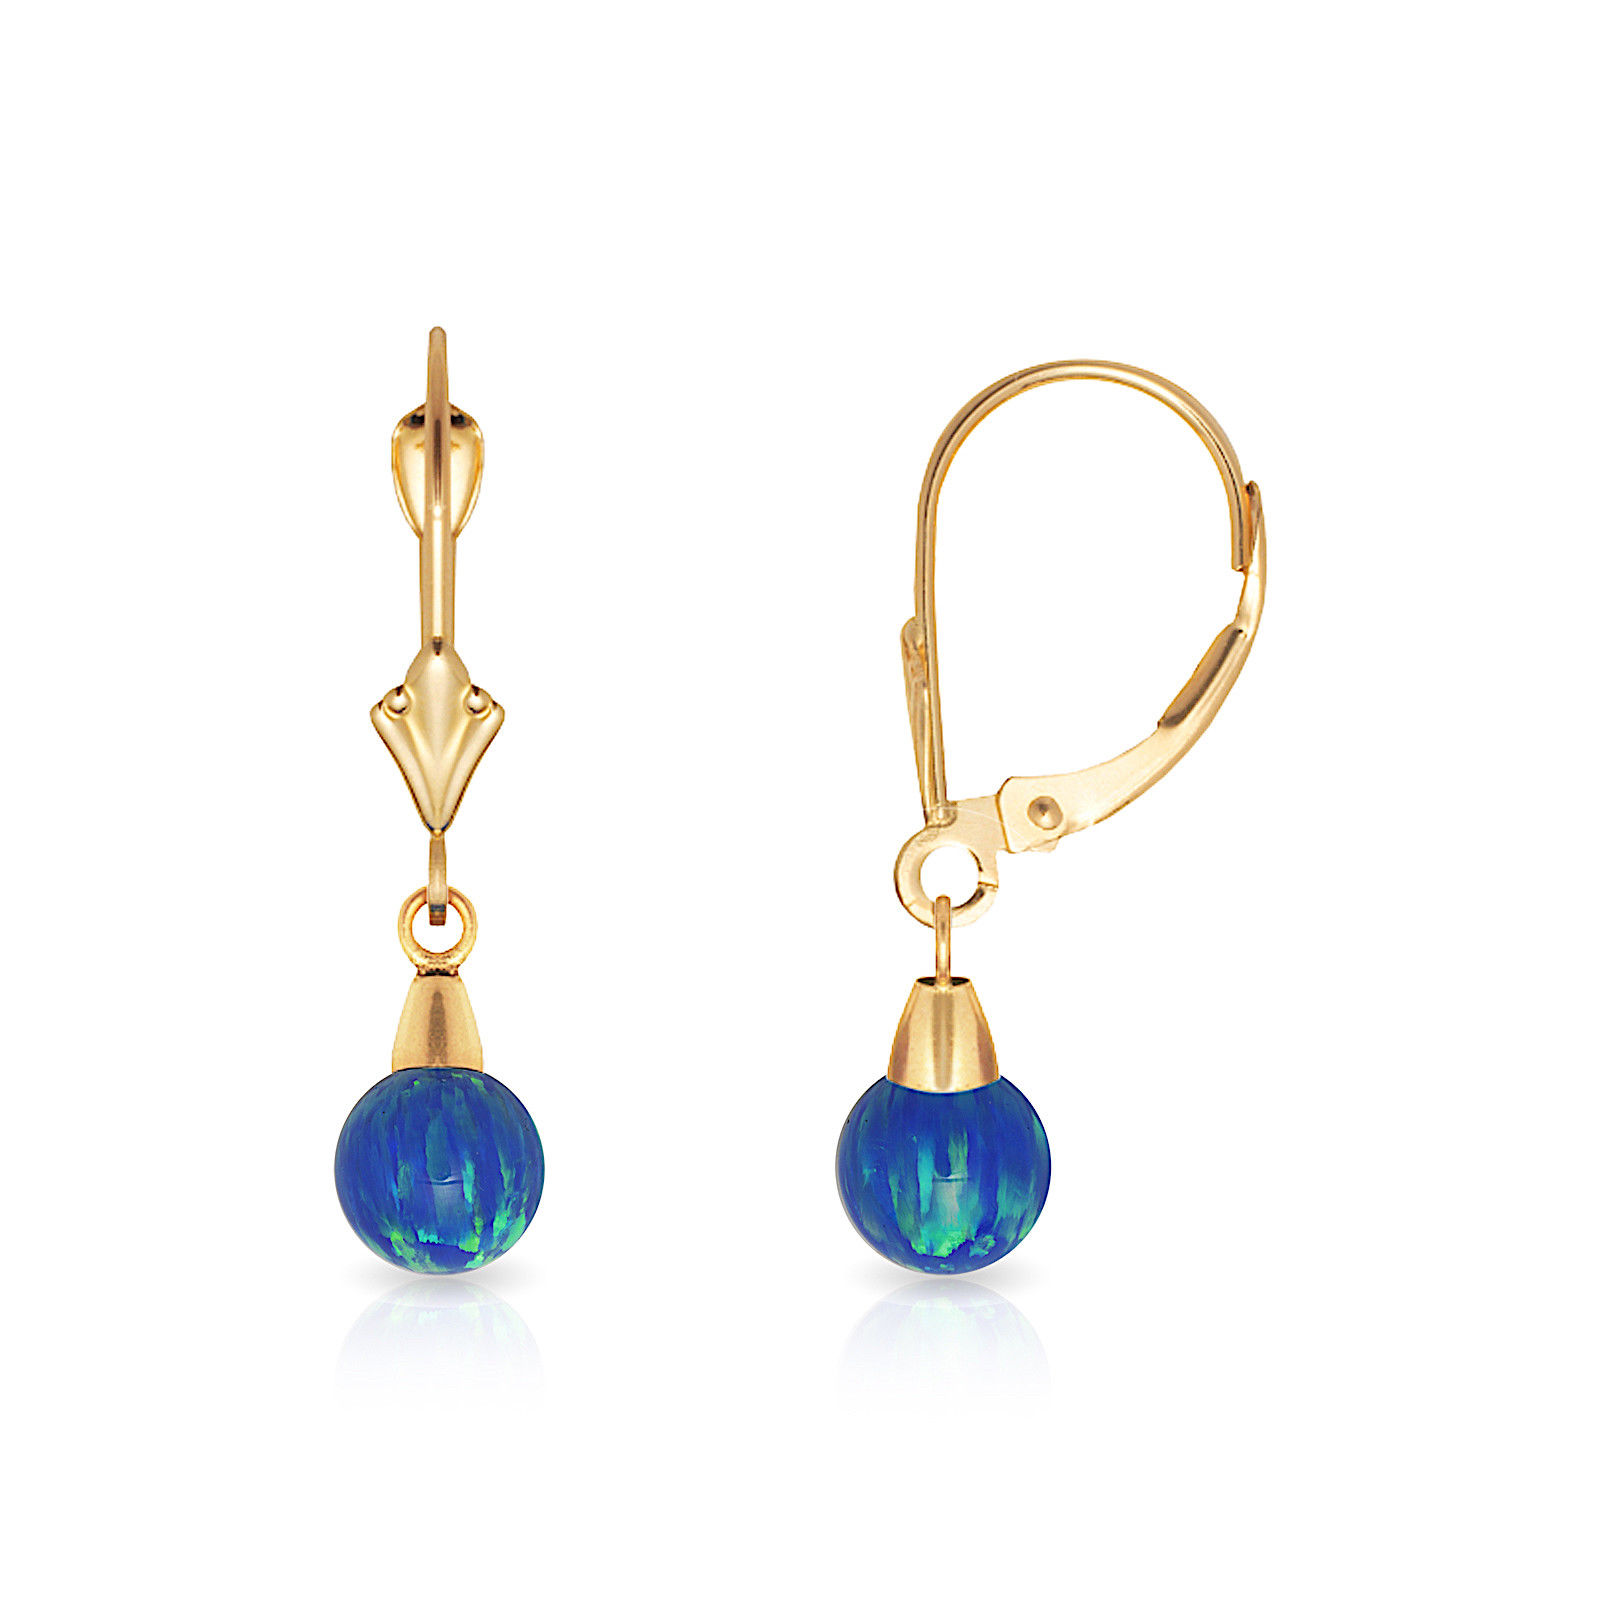 Jewelryweb 14k Yellow Gold Blue 6x6mm Simulated Opal Ball Drop Leverback Earrings - Measures 26x6mm